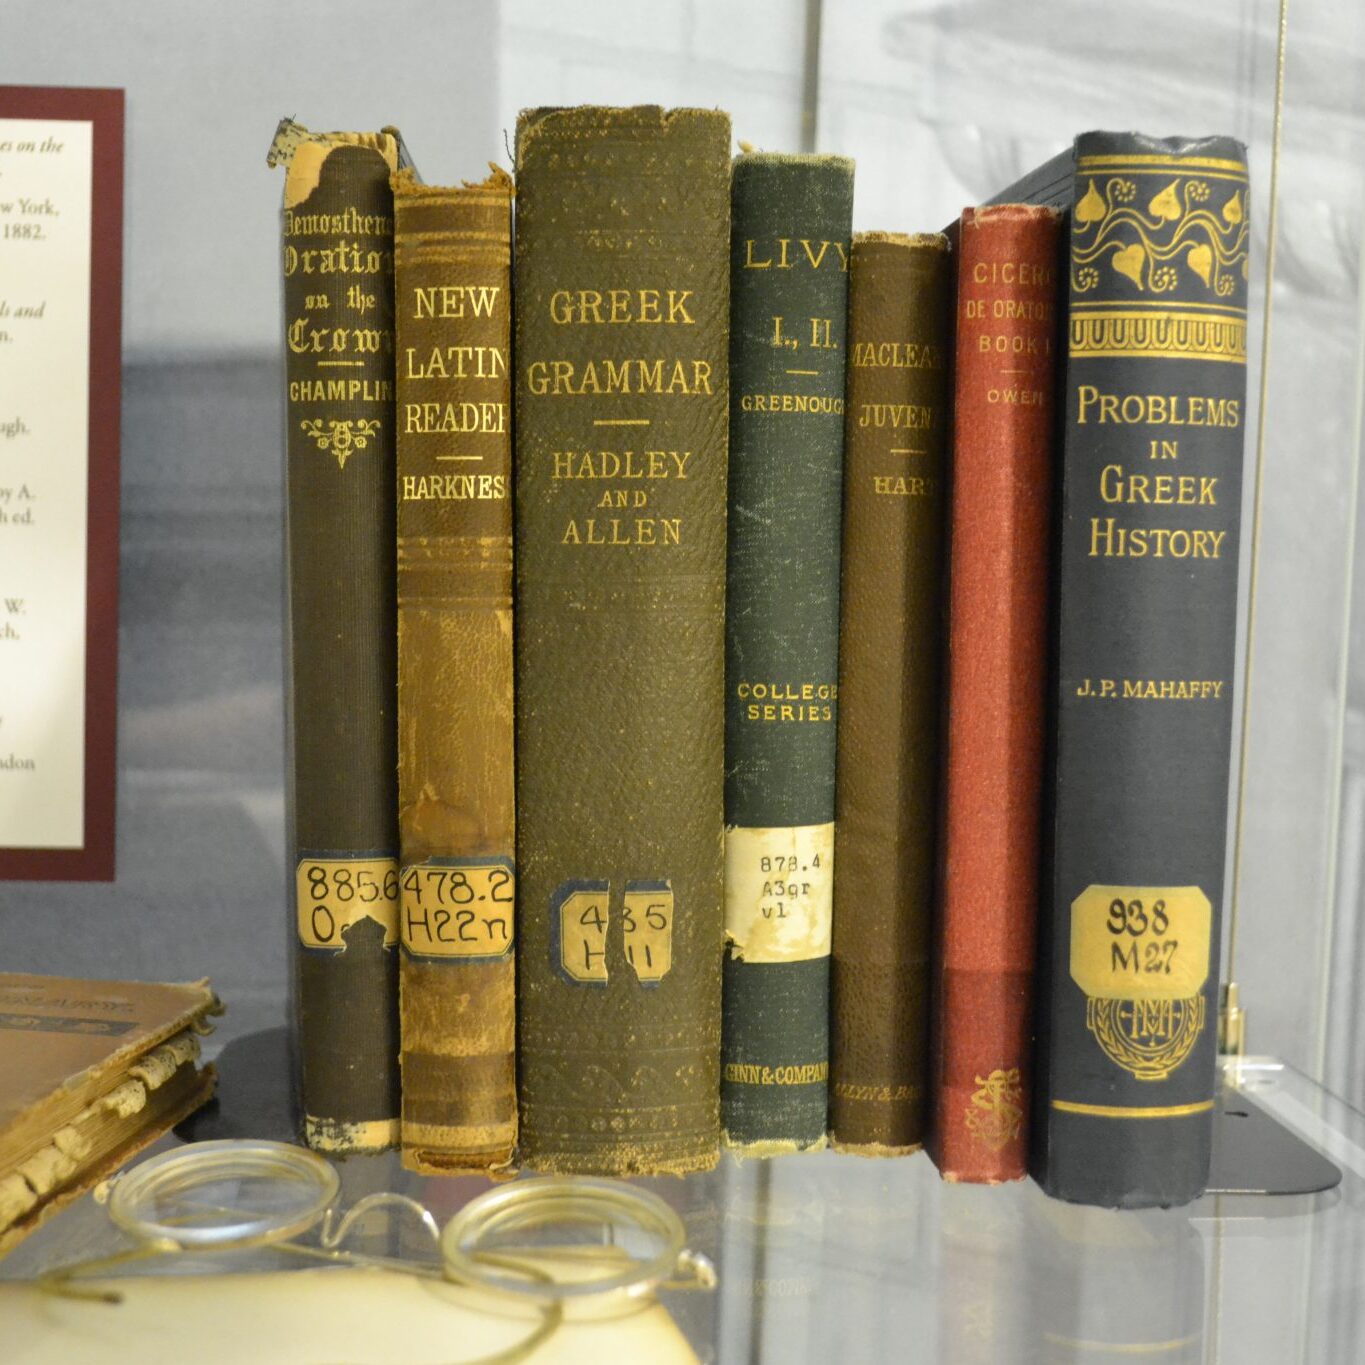 <p>Textbooks from the 1890's desk in Exhibition.</p><p>Photo by Erica Hiddink.</p>